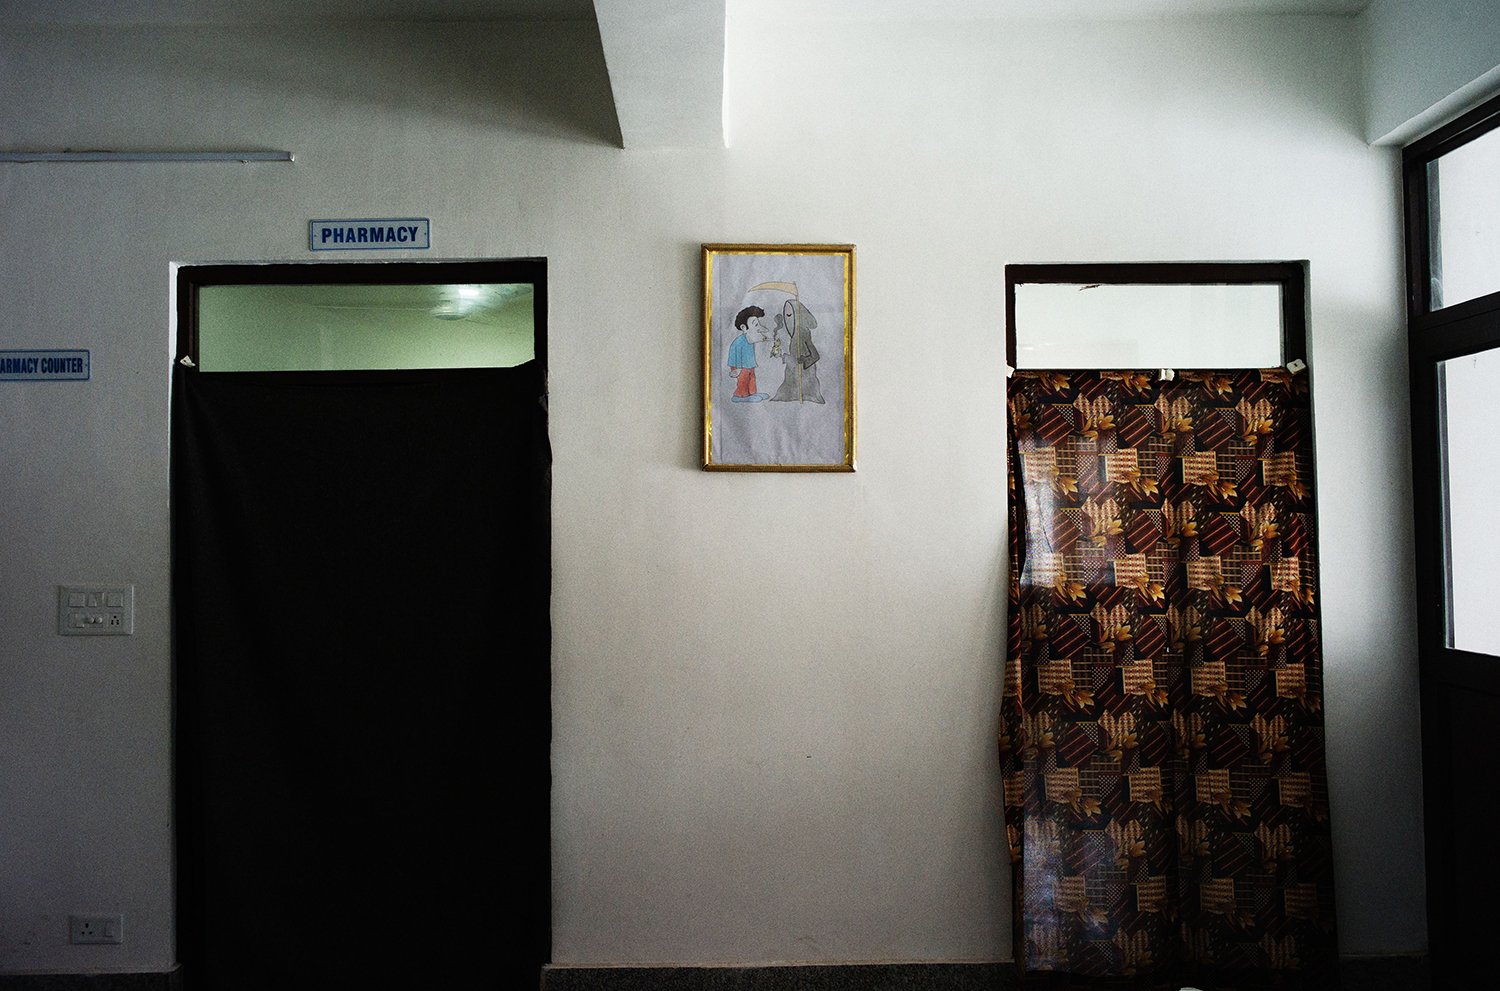  Inside one of the drug deaddiction centers in Kashmir. The painting on the wall was made by one of the mental health professionals.     © Portraits of Recovery  by Gaurav Datta.  Digital camera  